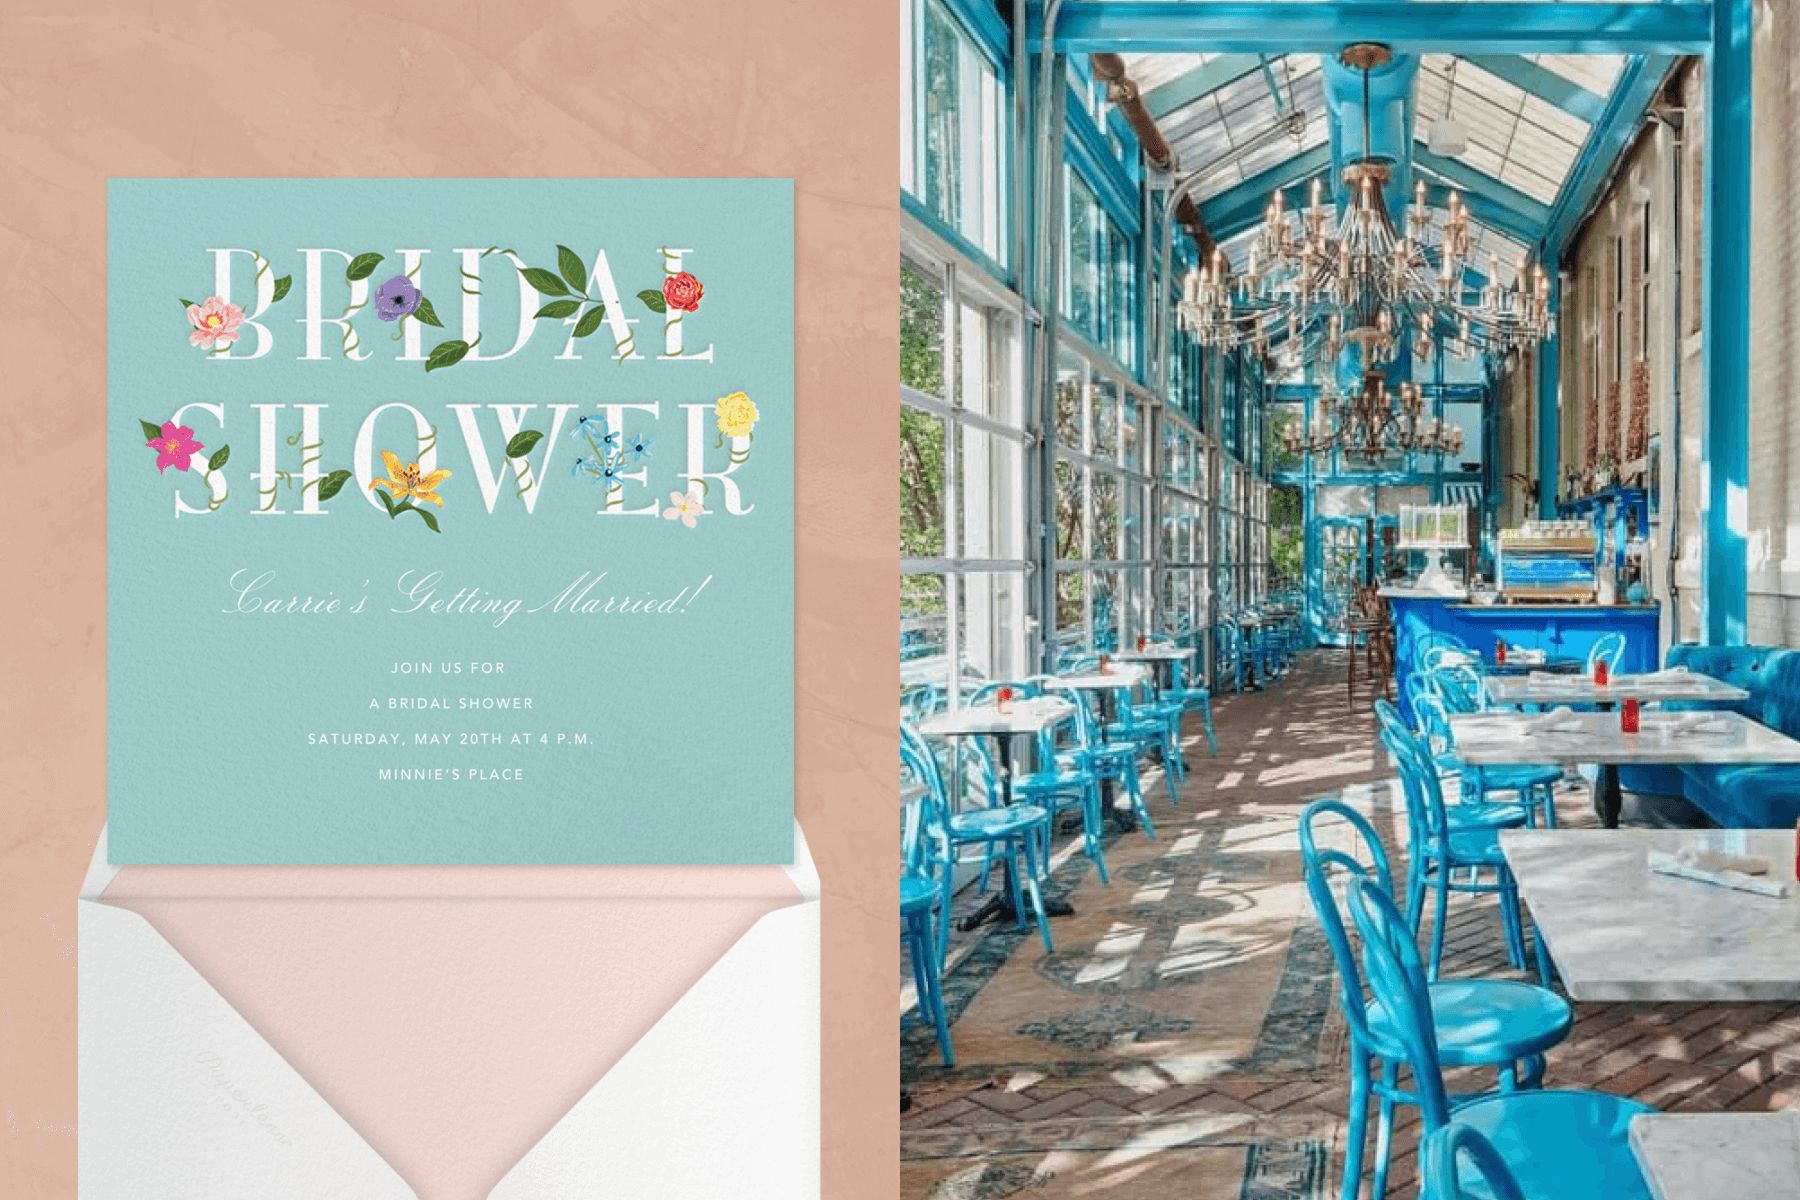 left: An aqua bridal shower invitation with bright flowers wrapped around large white letters spelling “BRIDAL SHOWER.” Right: Rows of blue café chairs and white square tables in a windowed room with a large chandelier and blue beams.